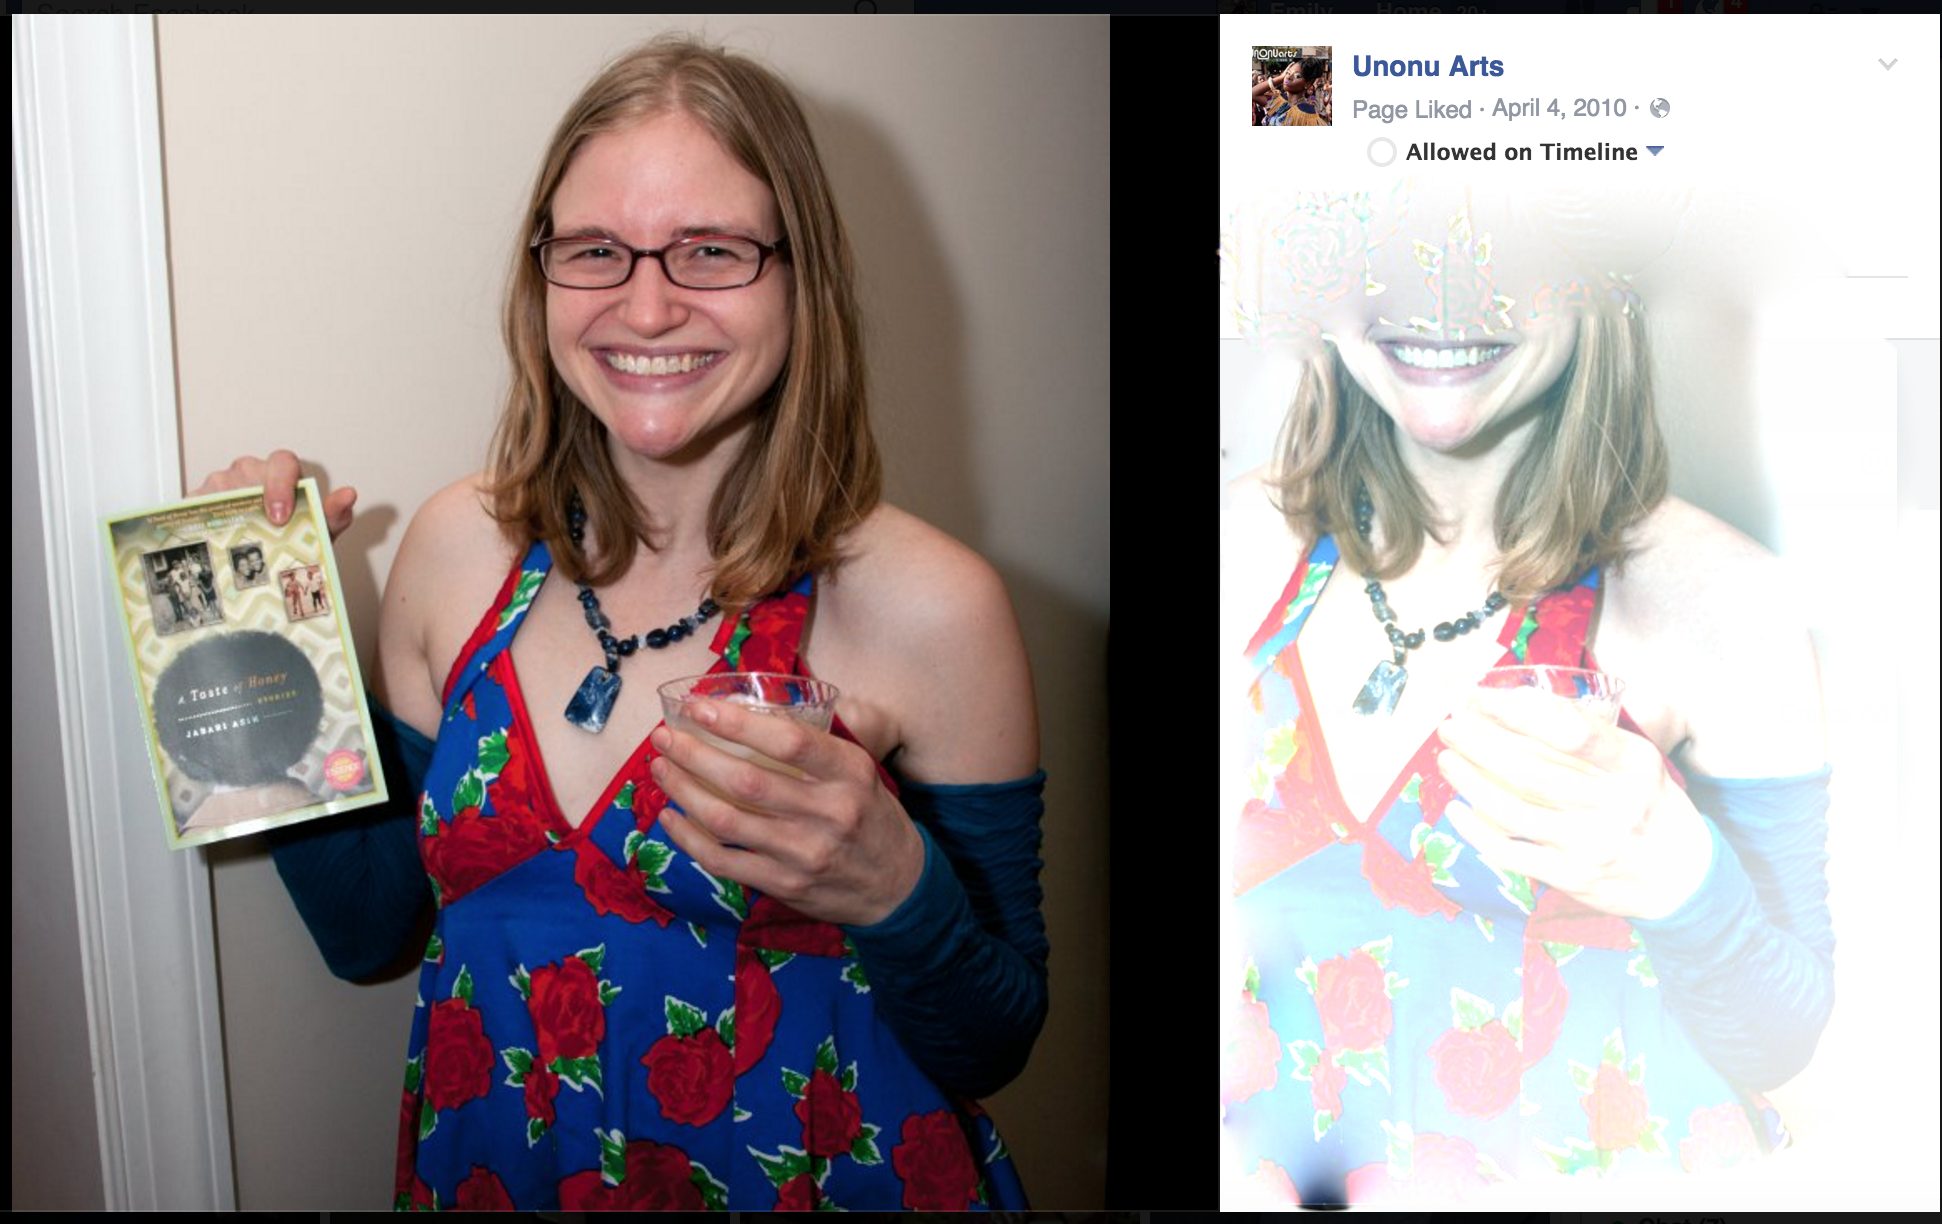 Same dress, different sleevs, 5+ years earlier